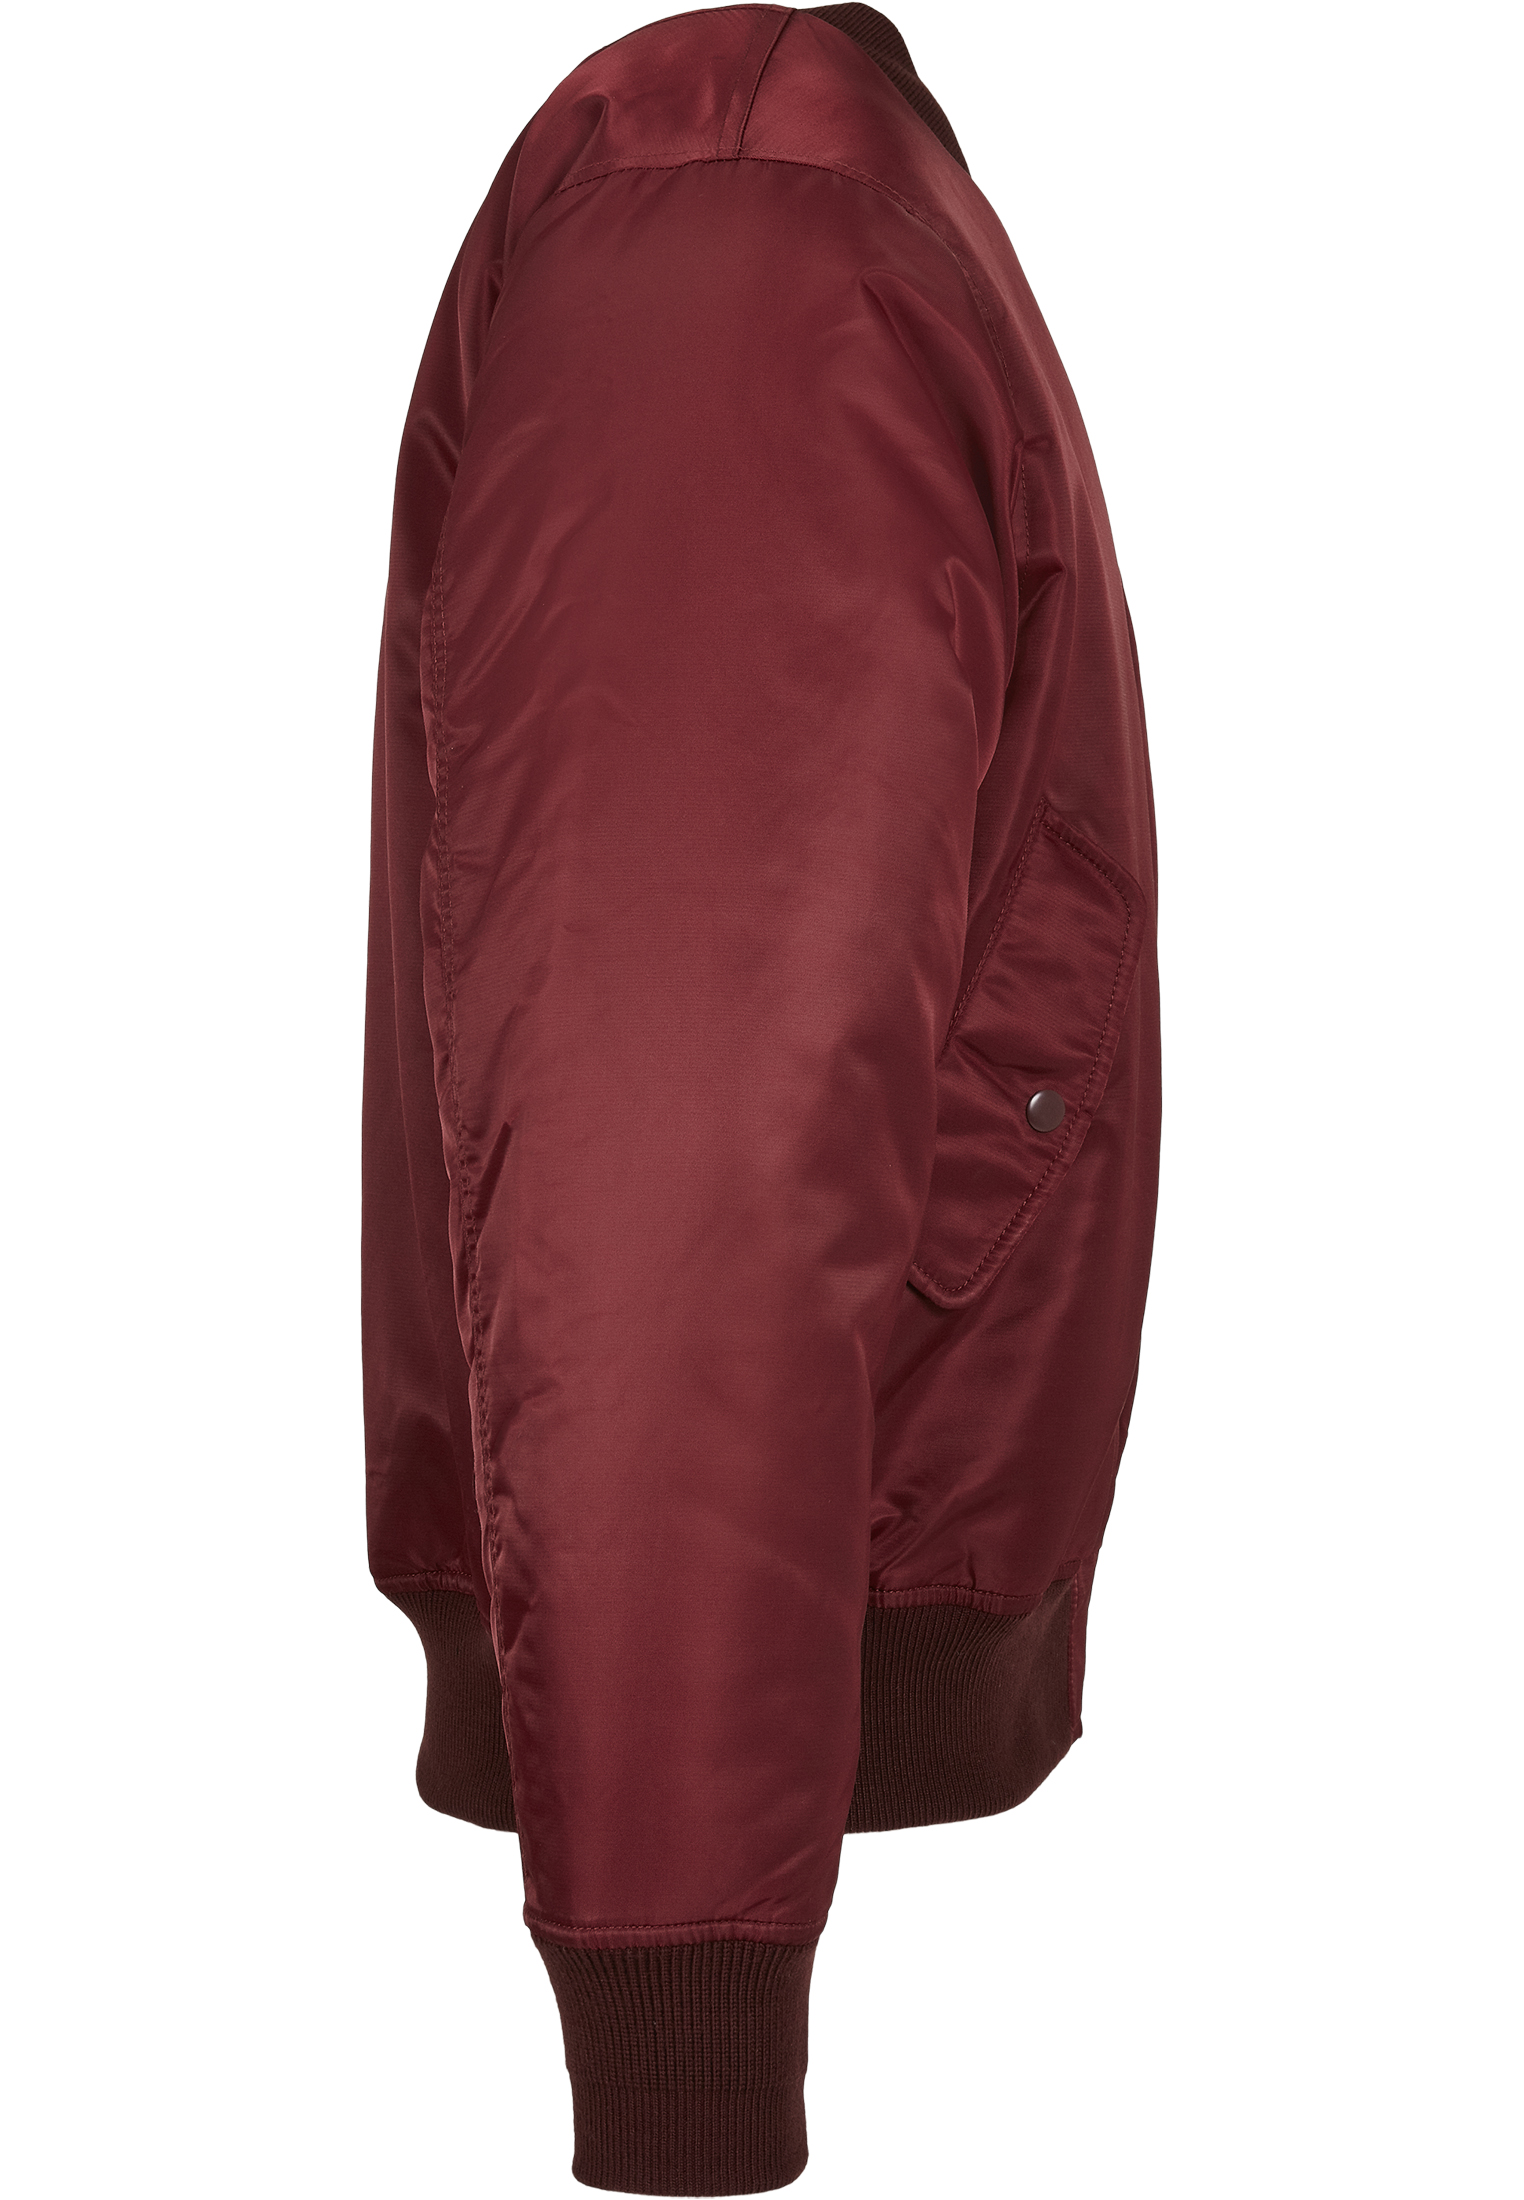 Build Your Brandit MA1 Jacket in Farbe burgundy